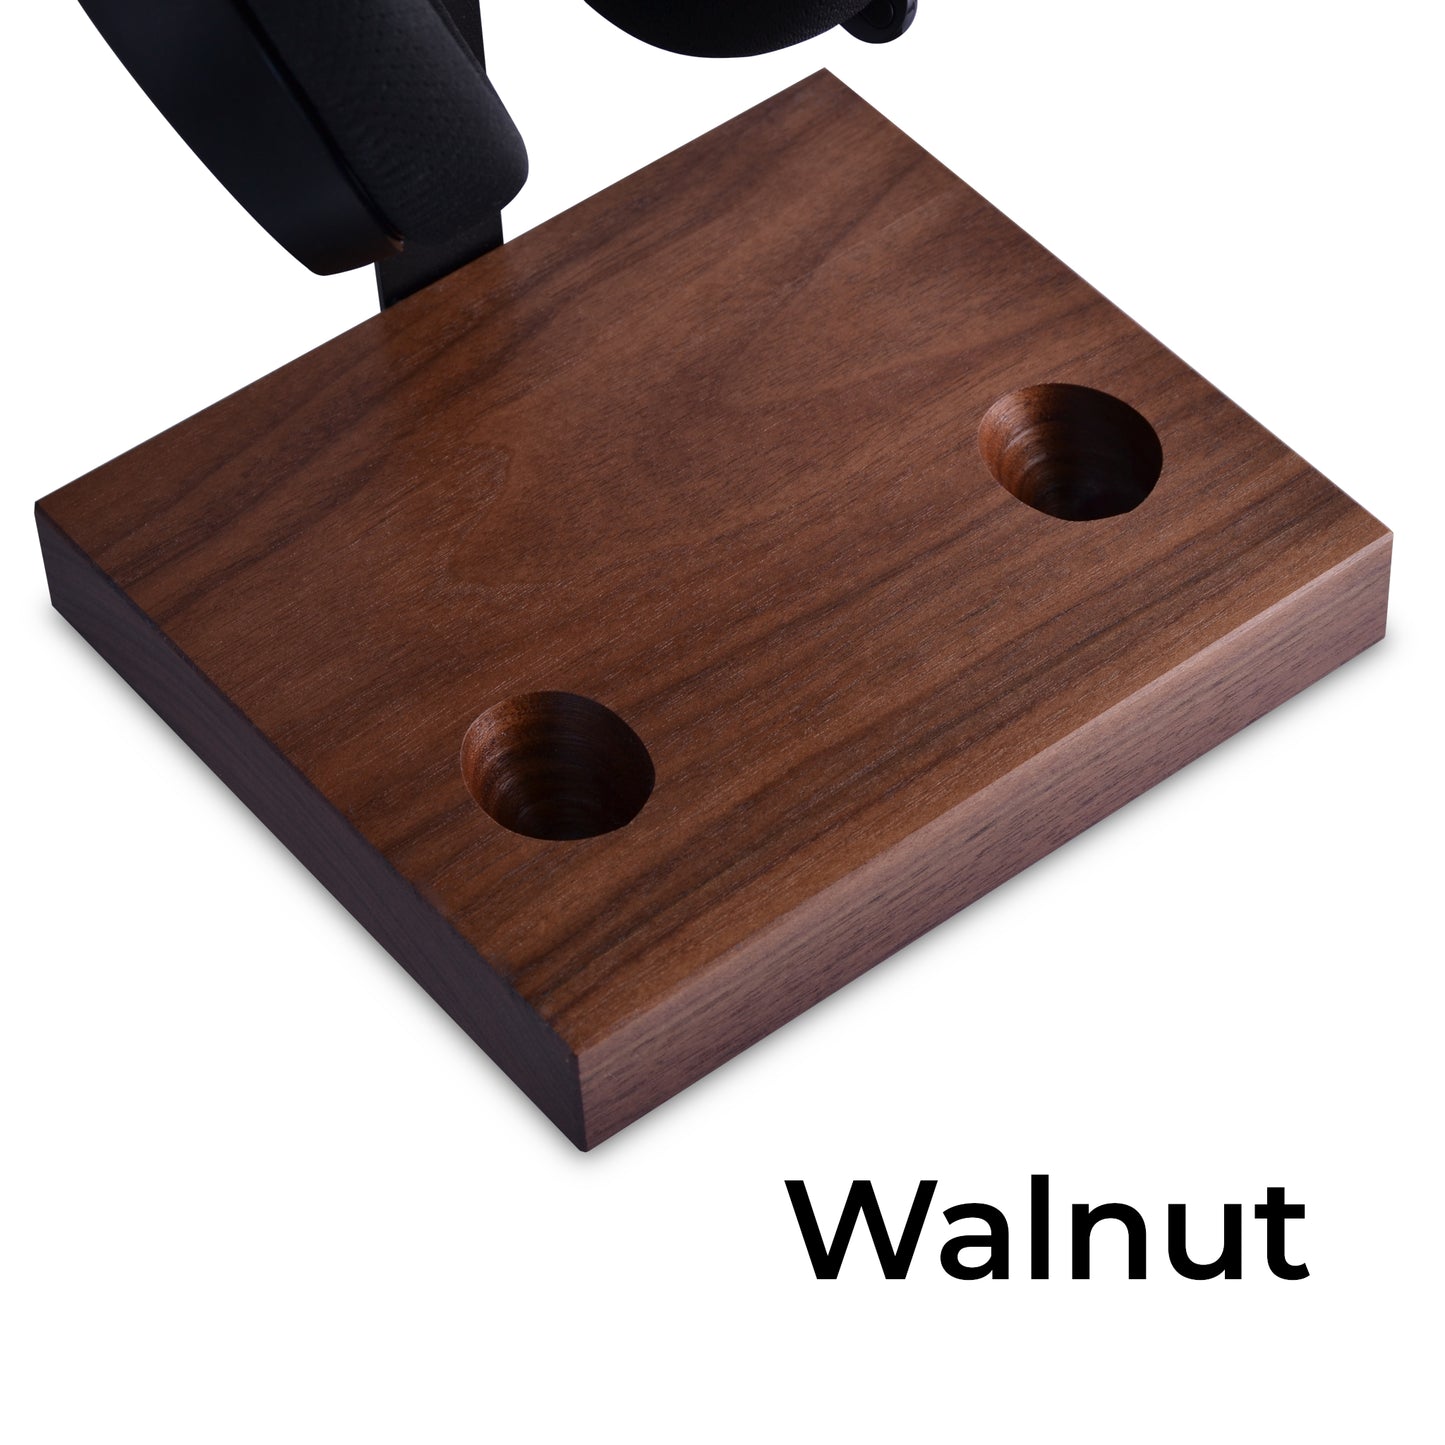 Walnut version of headset and controller stand for Playstation 4 dualshock controller